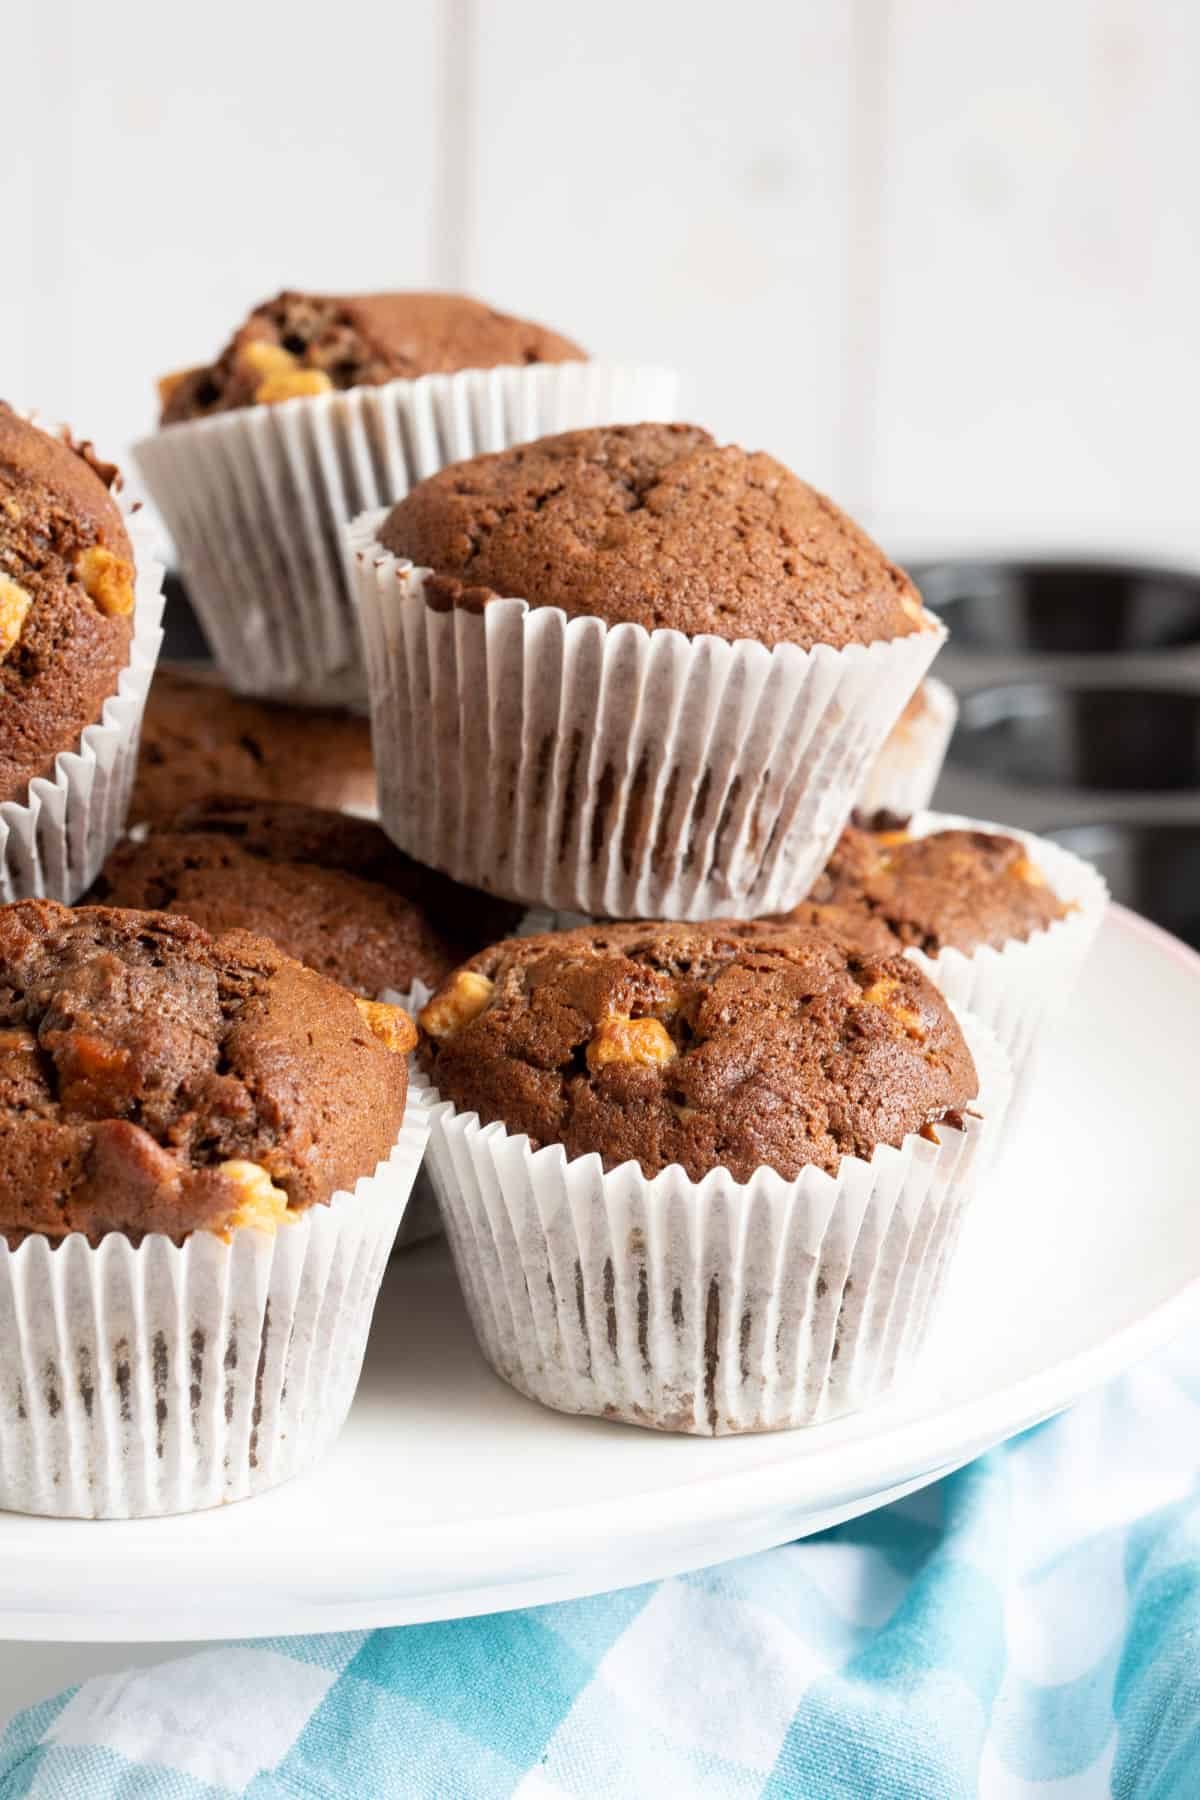 A stack of chocolate banana muffins on a white cake stand.